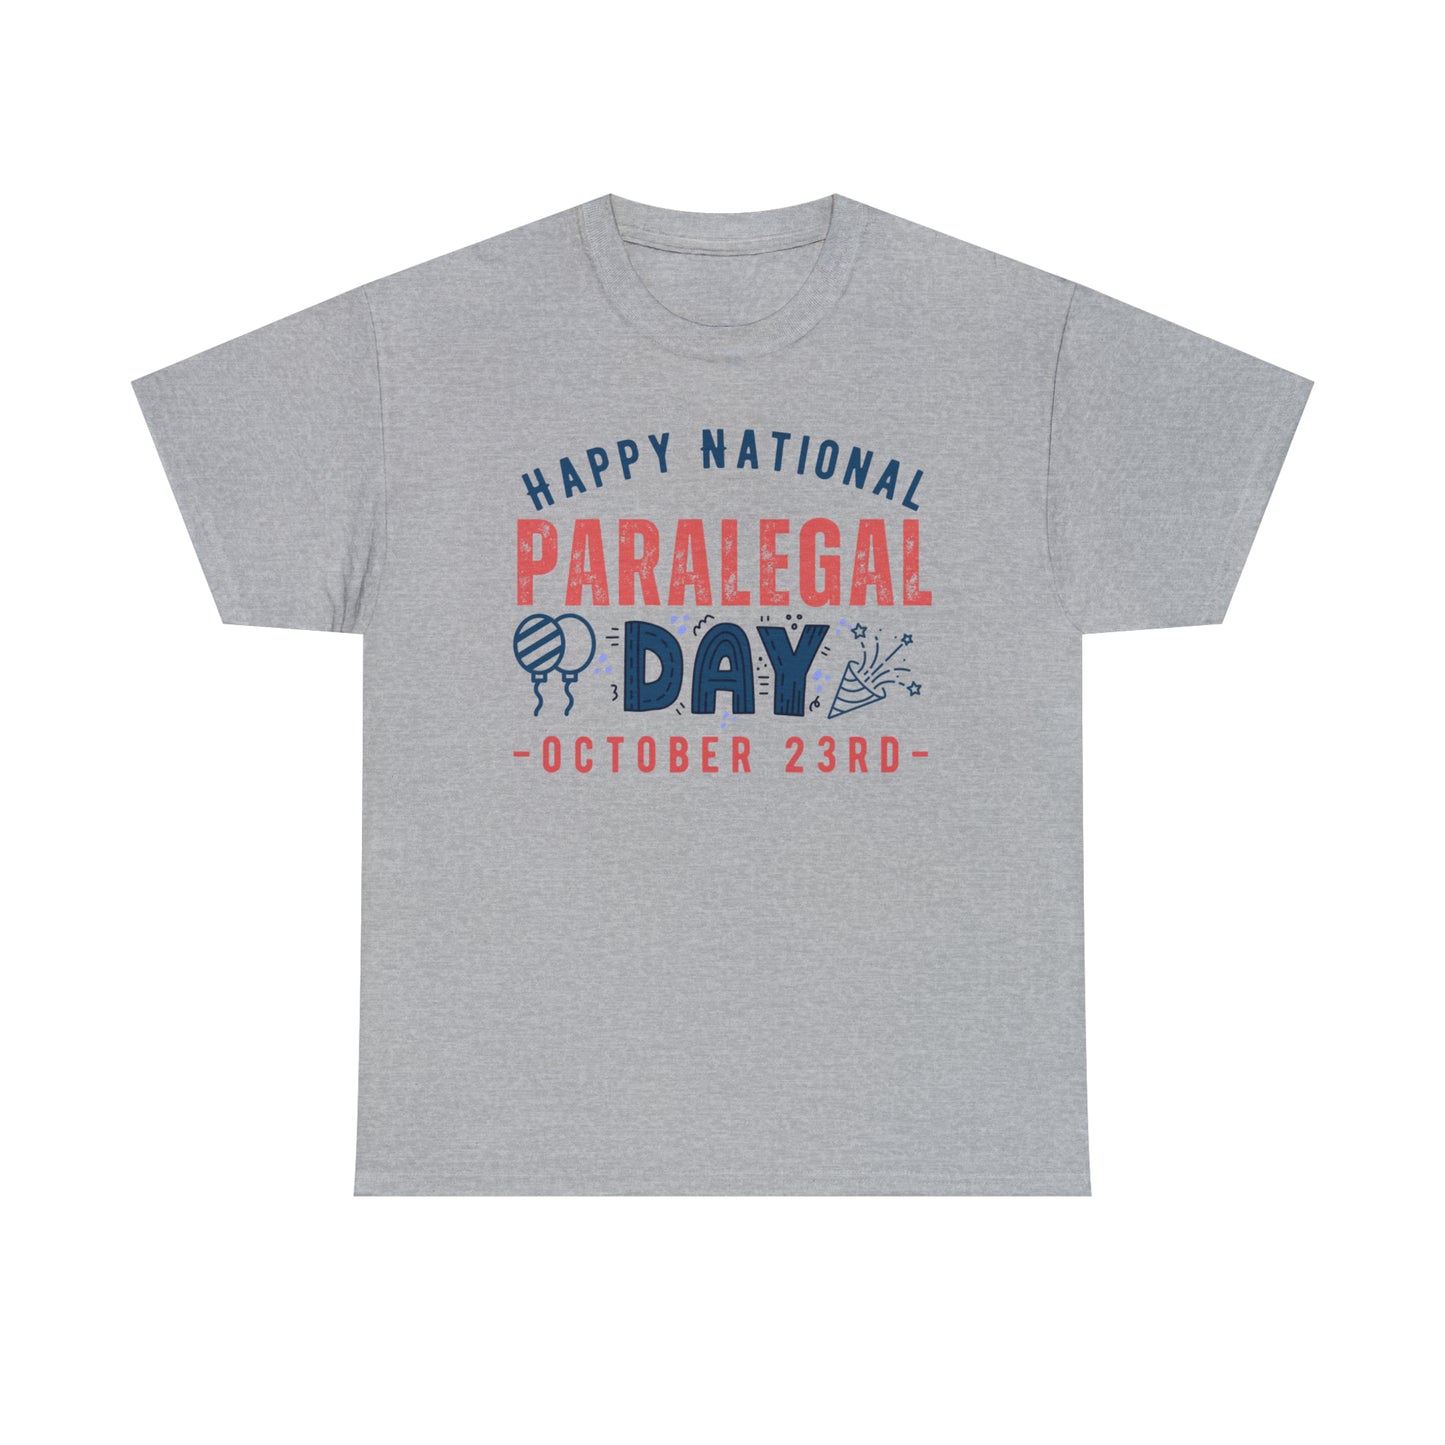 Happy National Paralegal Day October 23rd Occupation T-Shirt | Unisex Tee Shirt